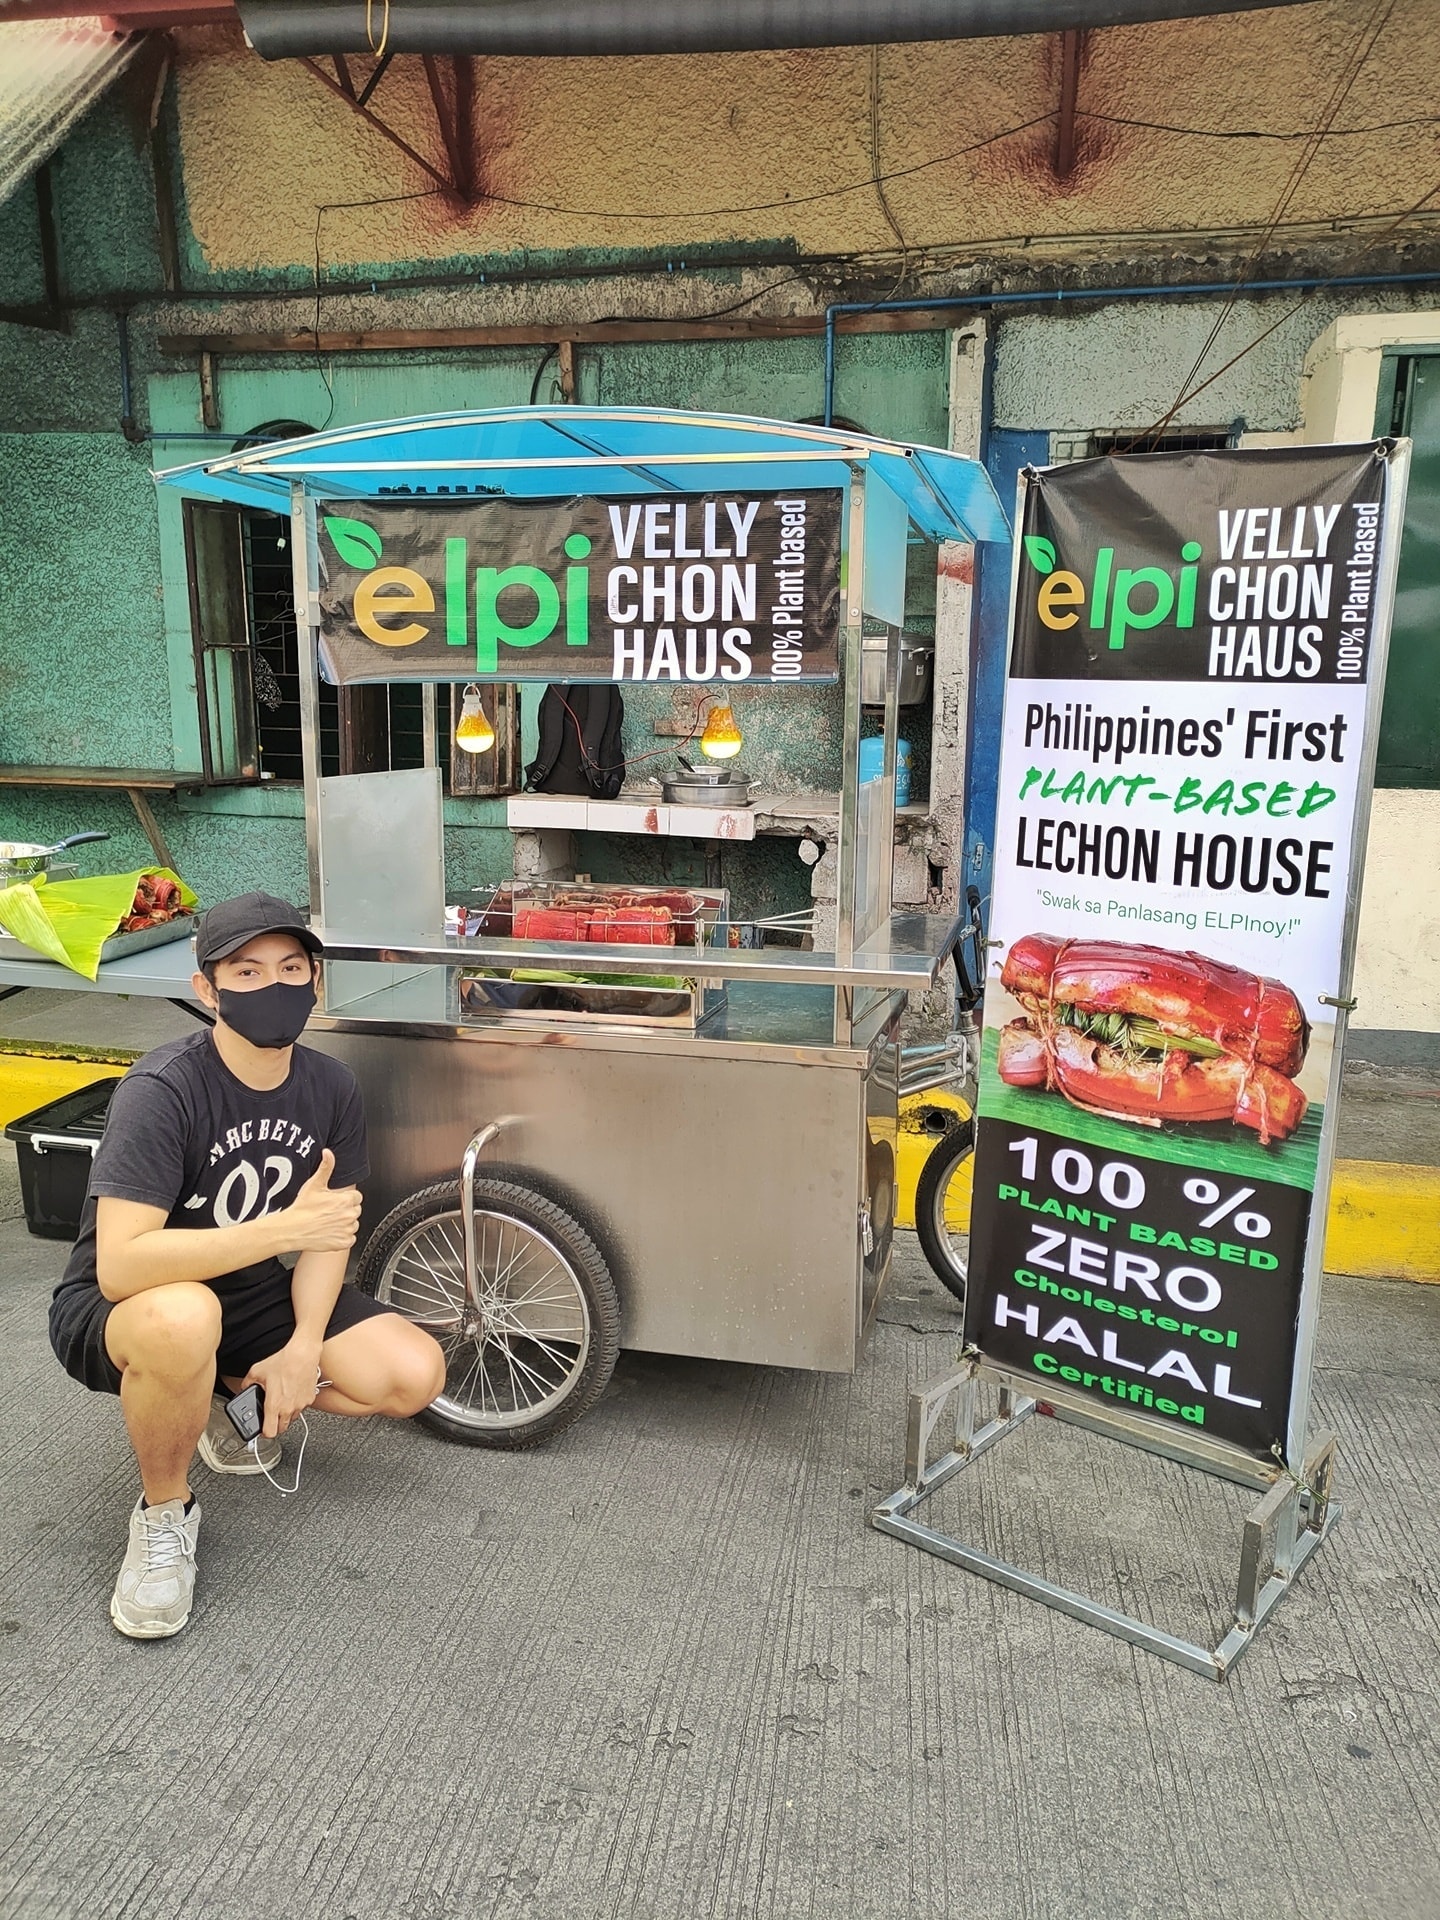 Chef Elpi and his mobile food stall